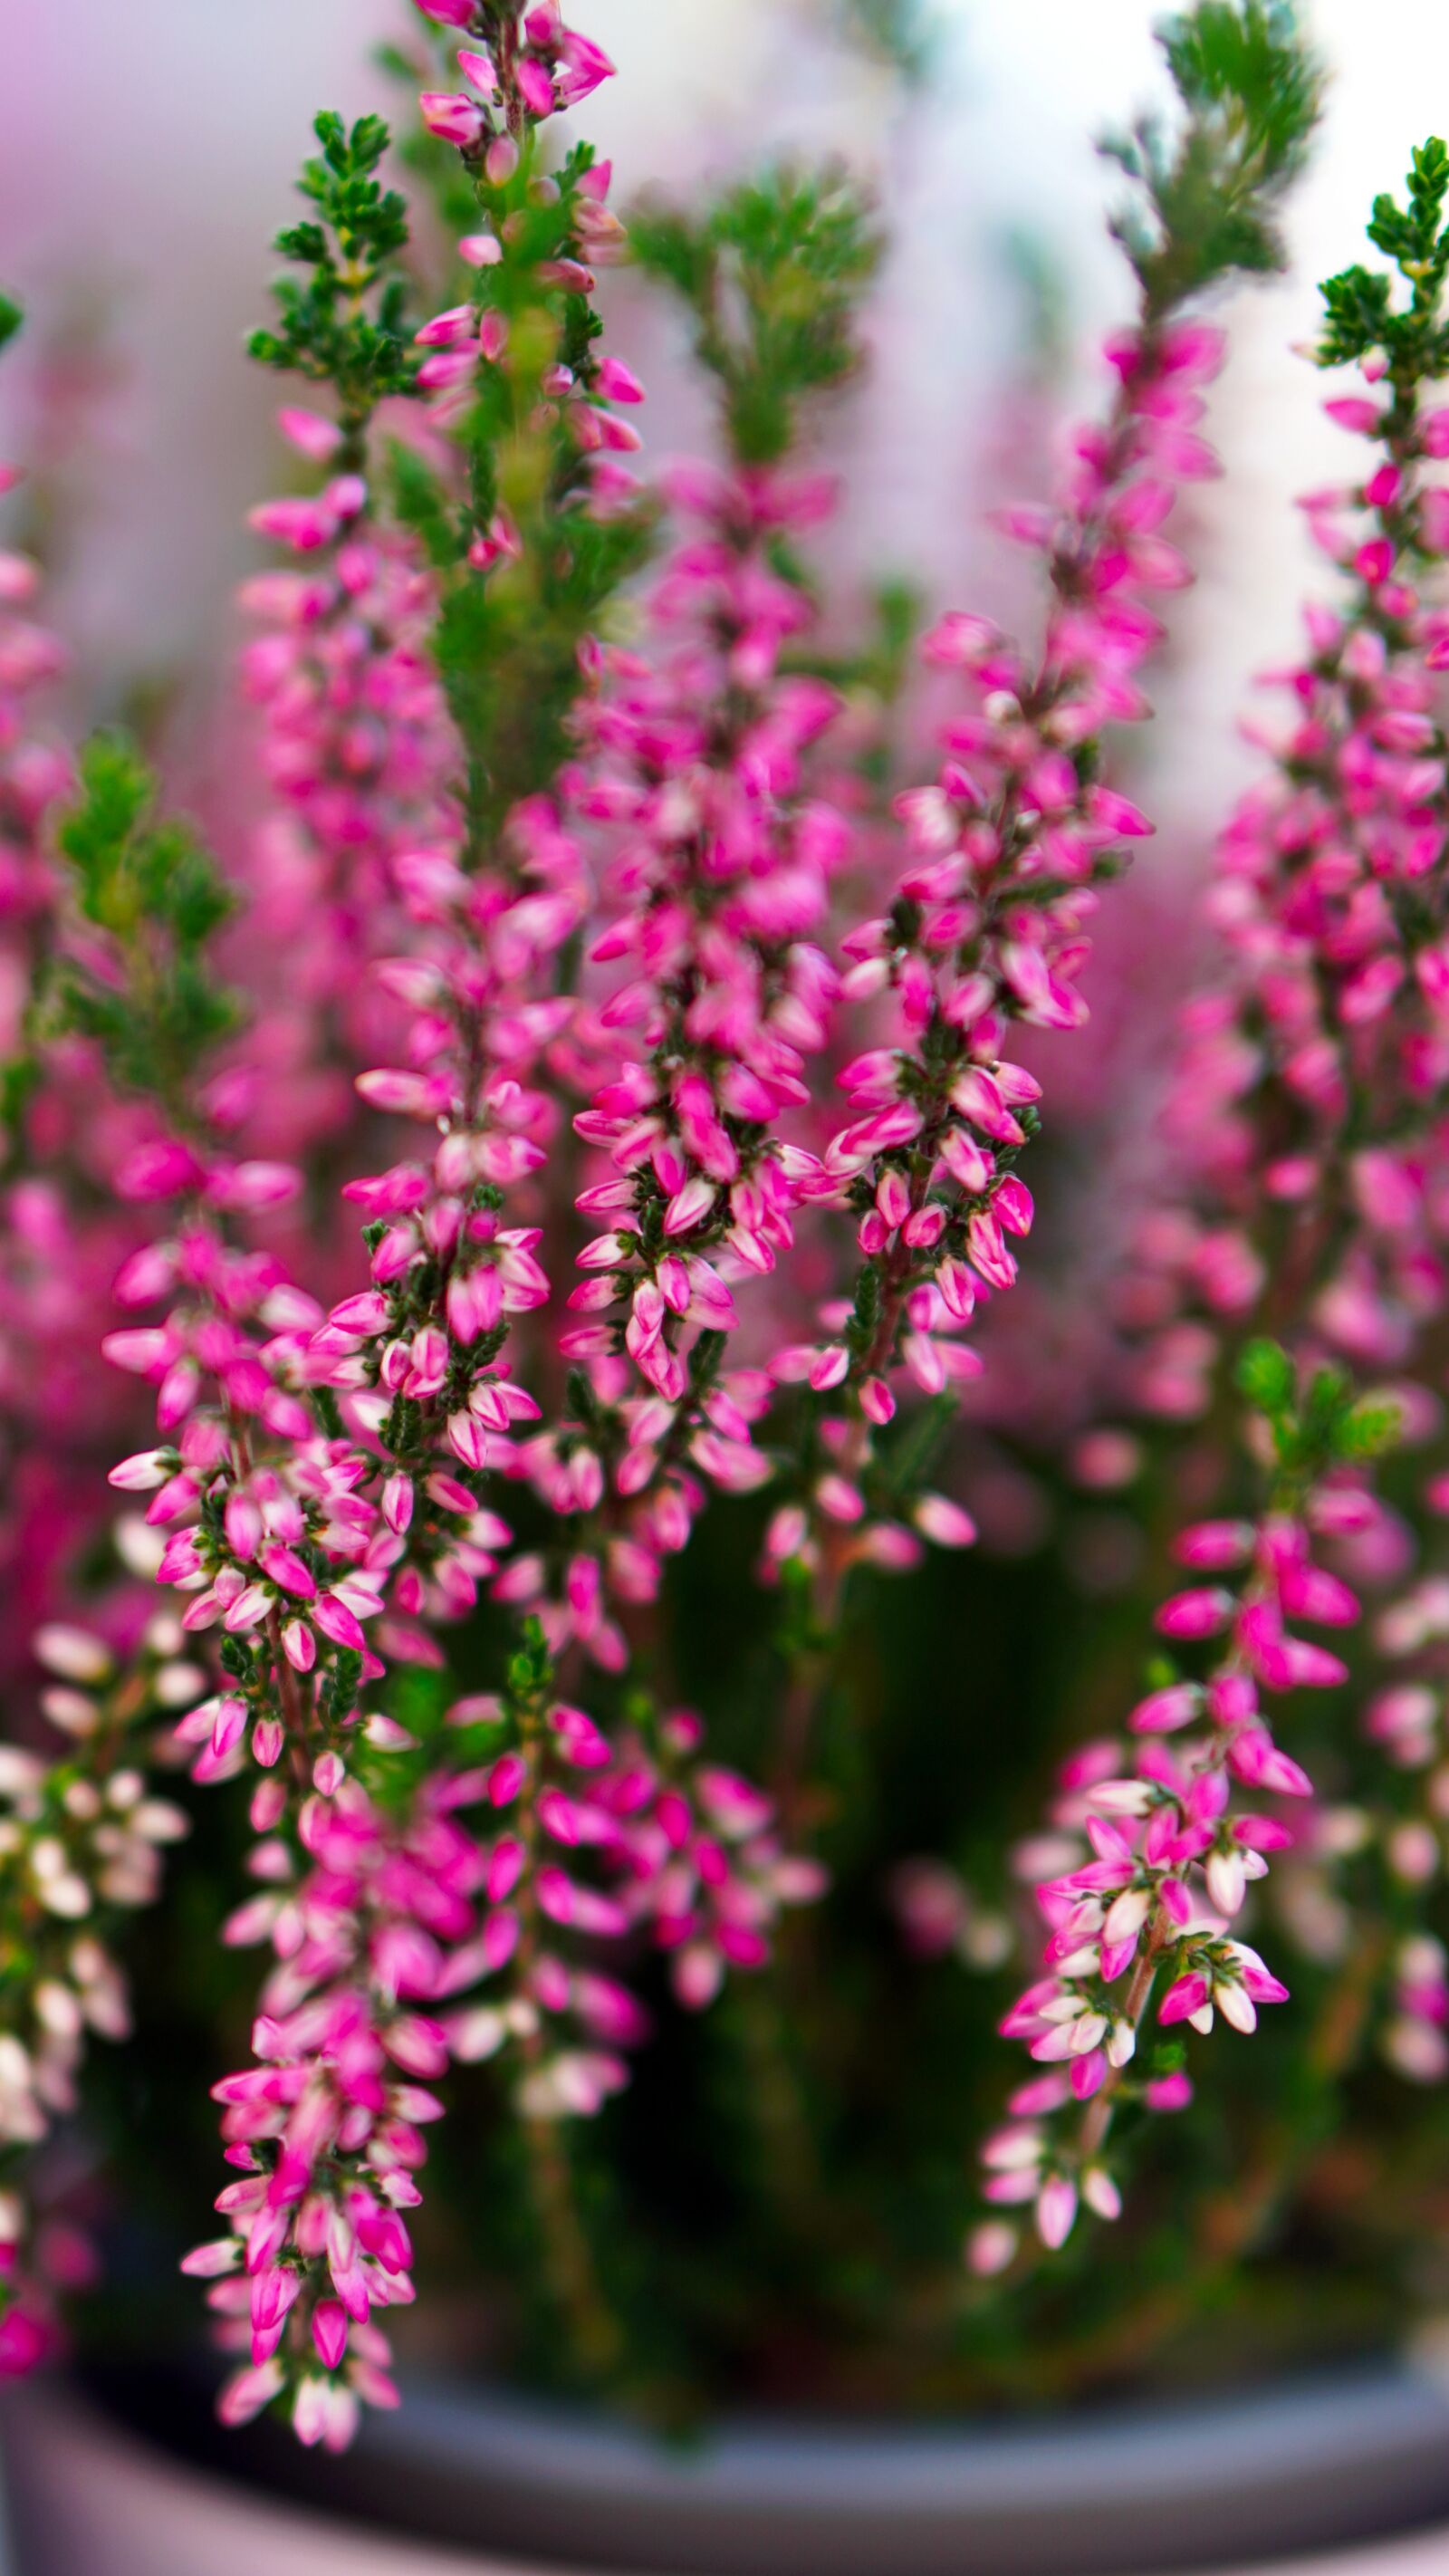 Sony a6400 sample photo. Flowers, heather flowers, bloom photography